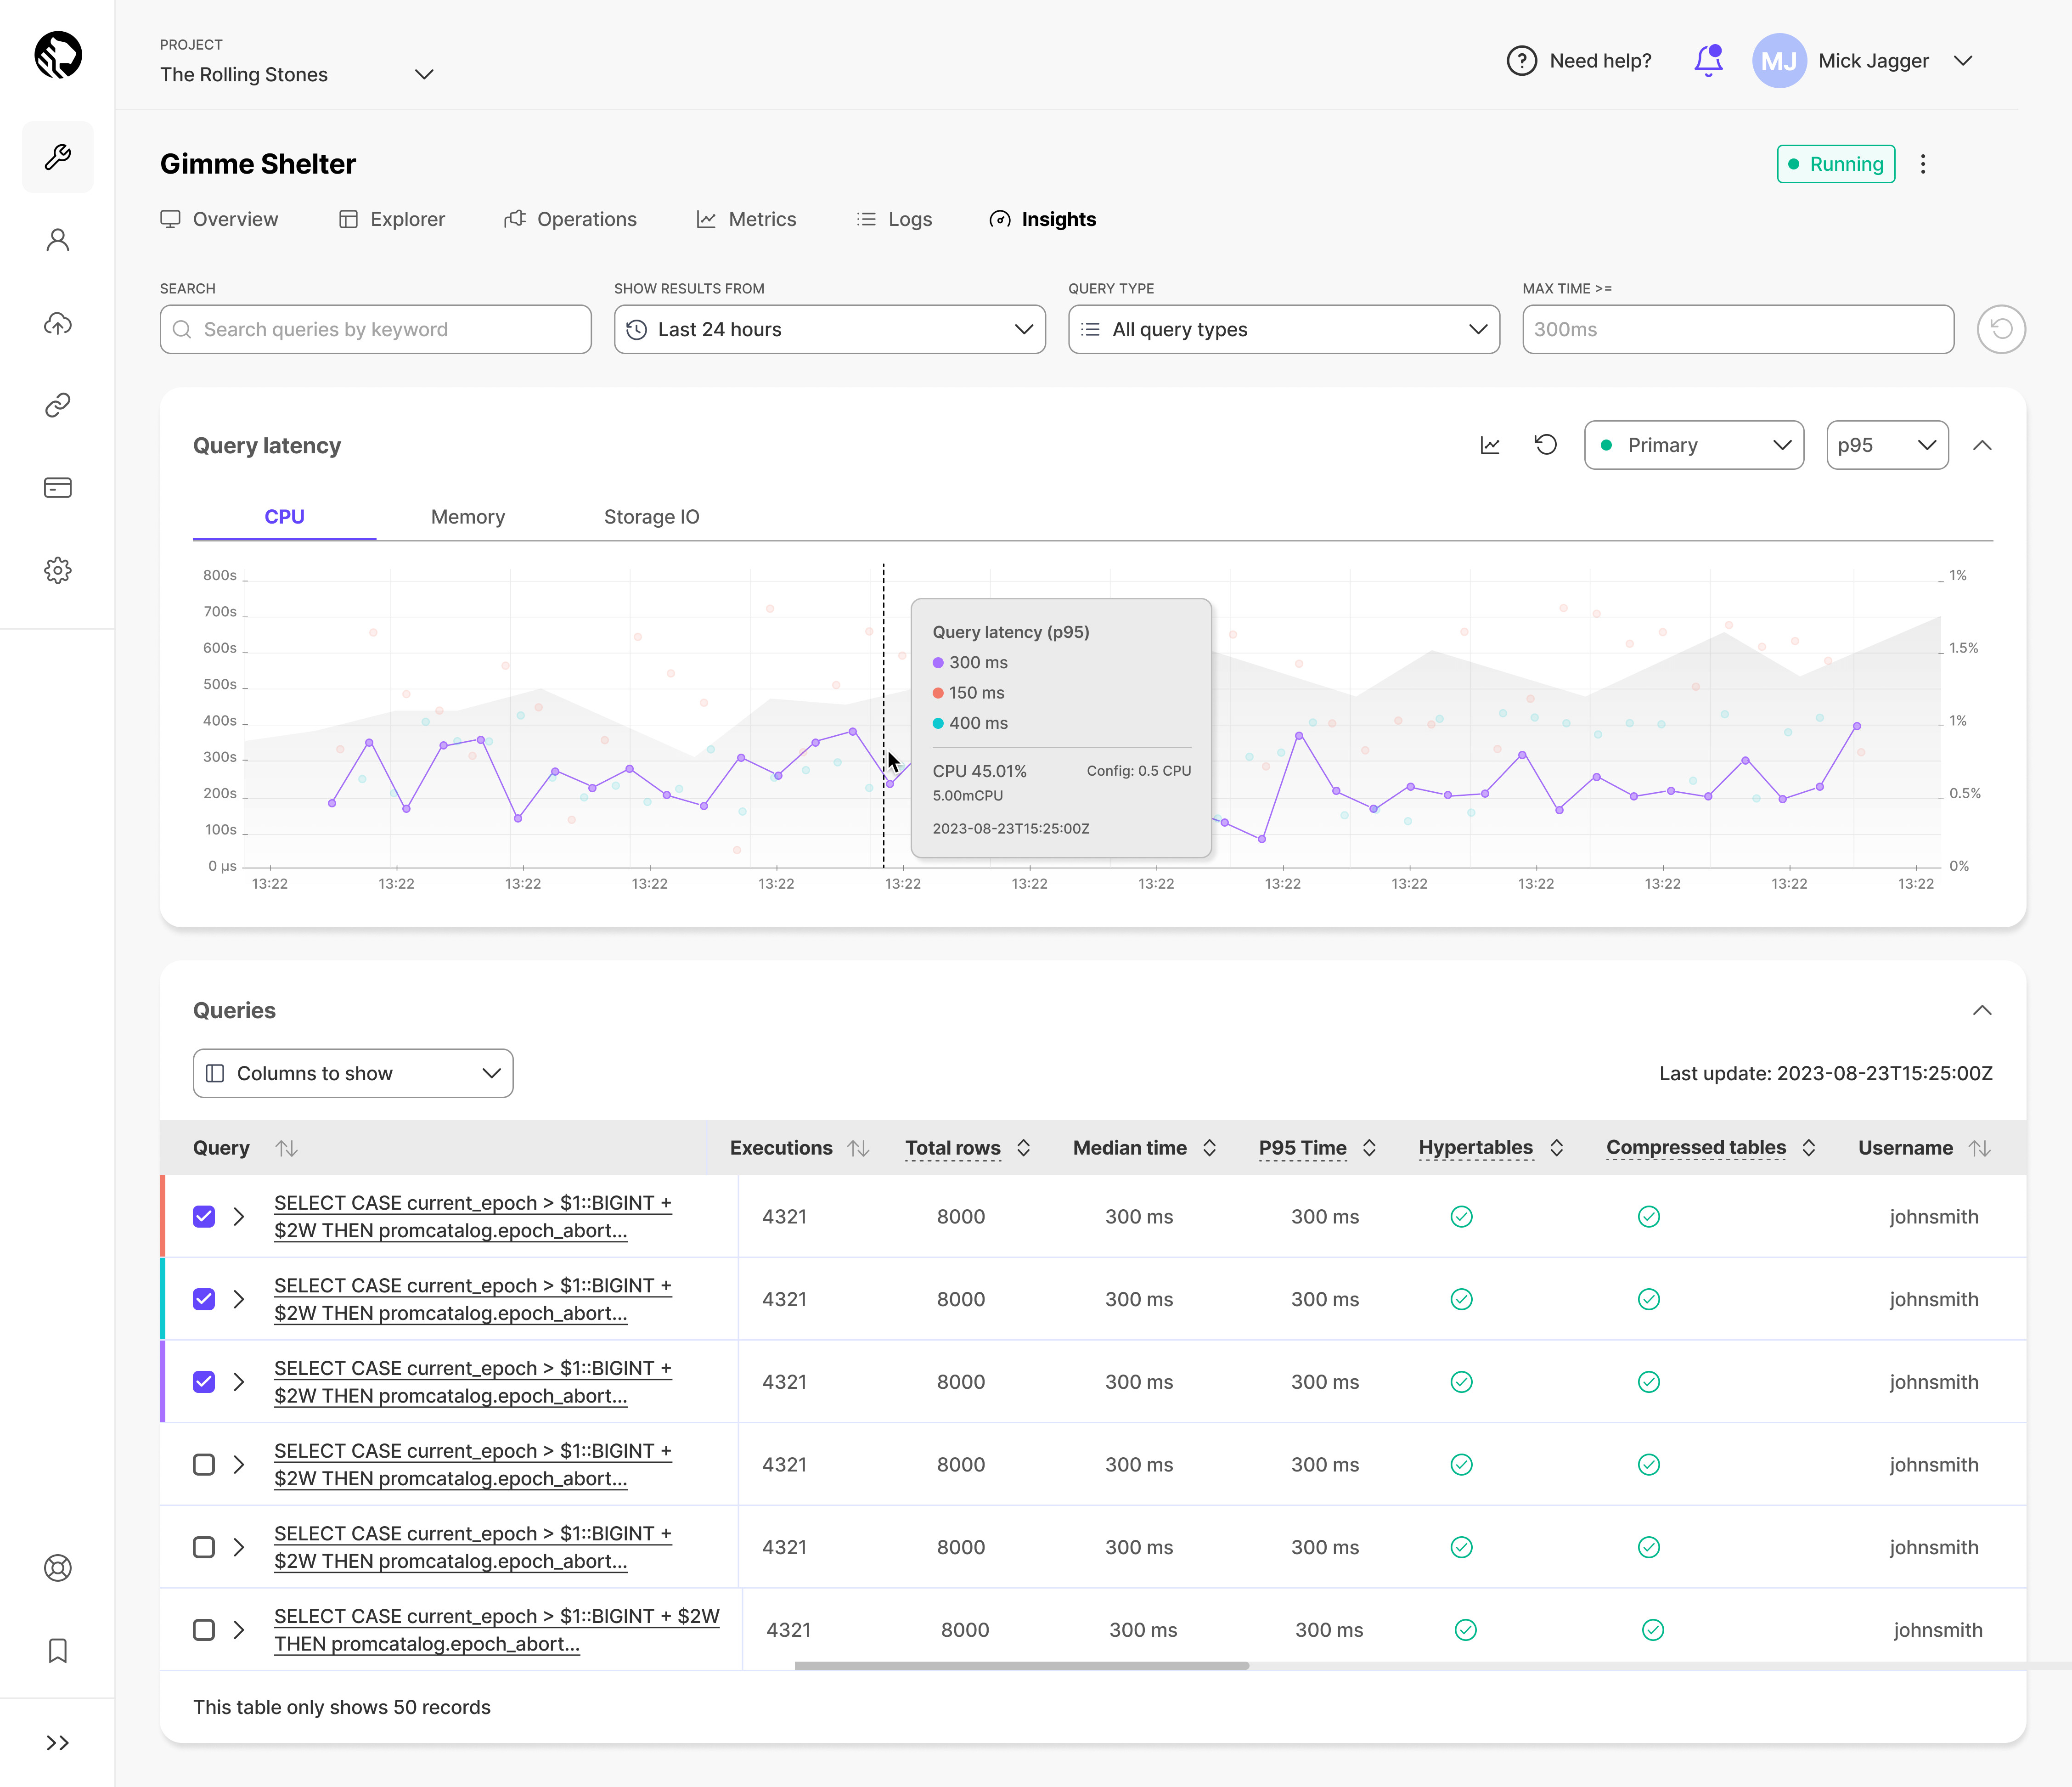  Insights collects information about query latency, CPU, memory, I/O, shared buffers, and other metrics across all Timescale databases, ingesting billions of records per day